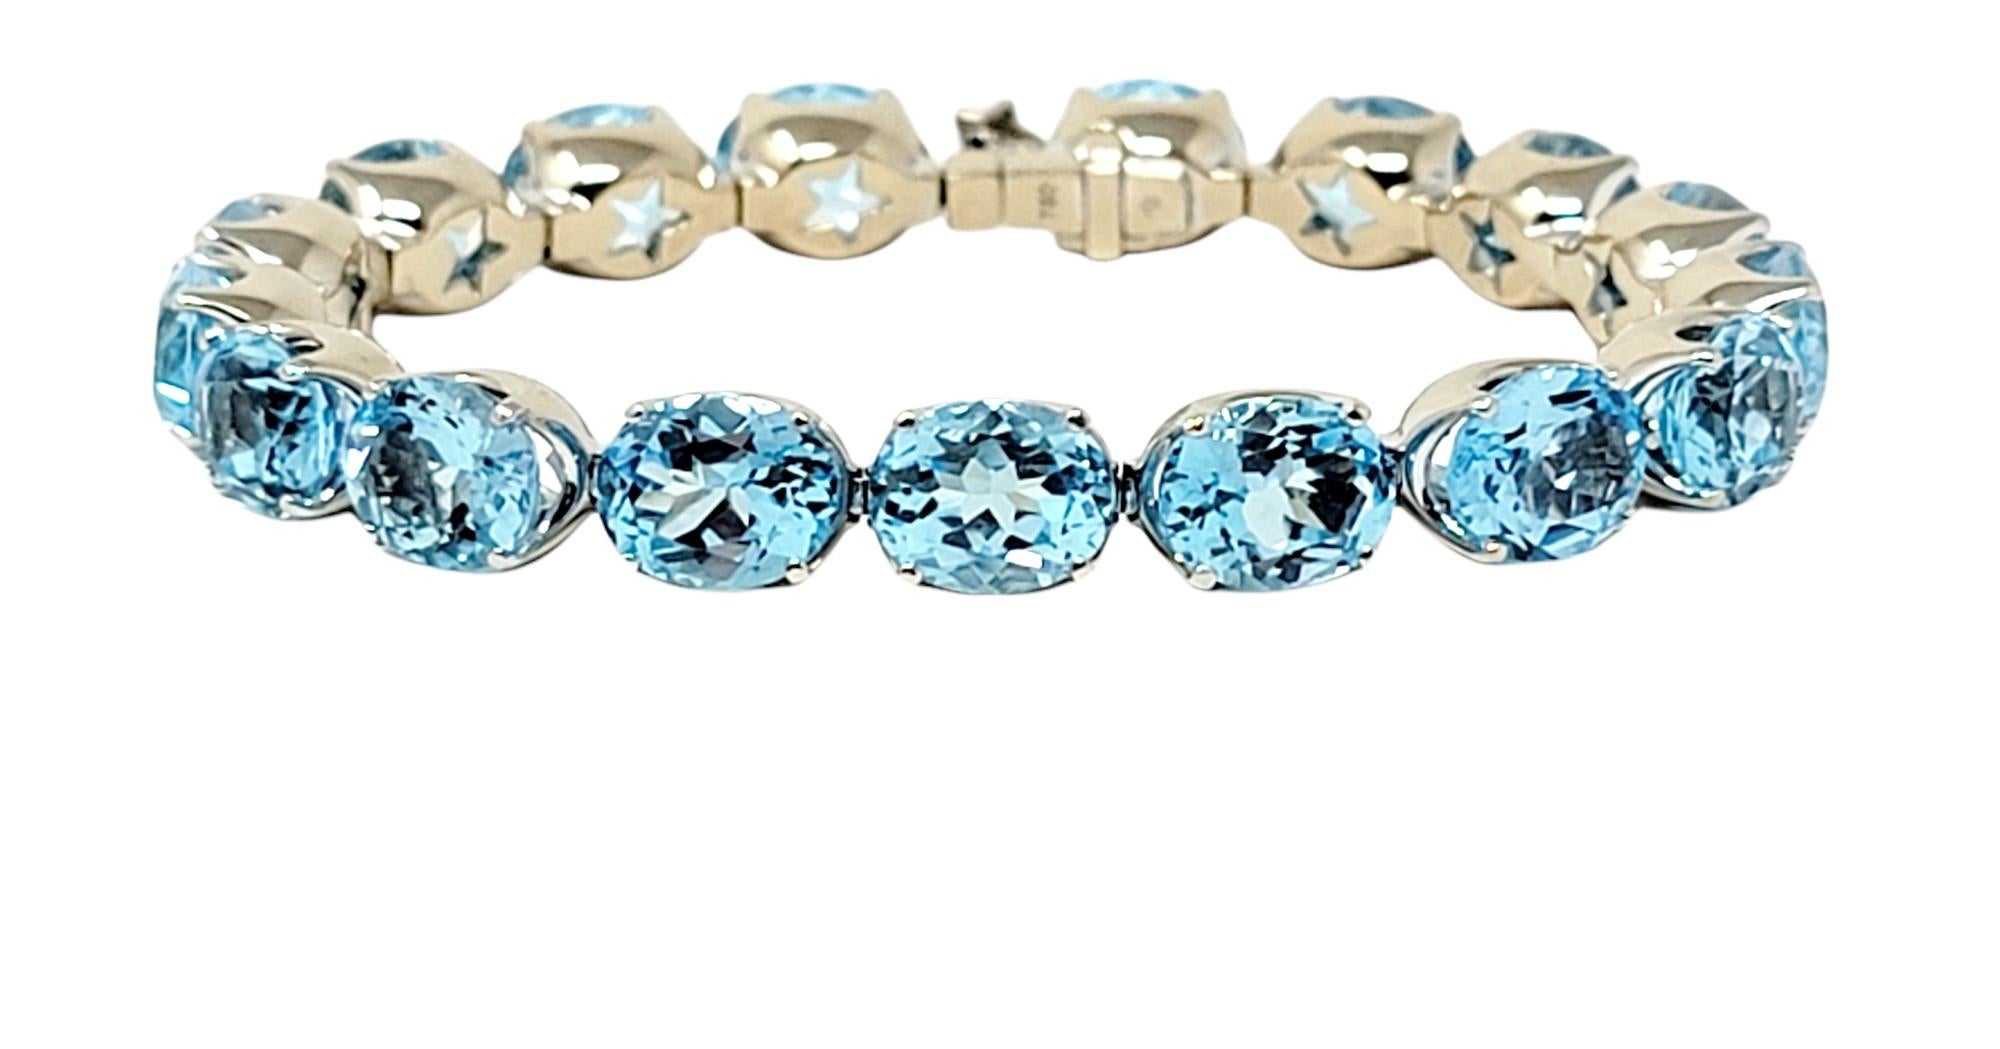 Breathtaking bright blue topaz tennis bracelet by H. Stern. This gorgeous tennis bracelet features an impressive 58.65 carats total of sparkling natural blue topaz stones, bright ice blue in color. The 17 oval cut stones are prong set in a